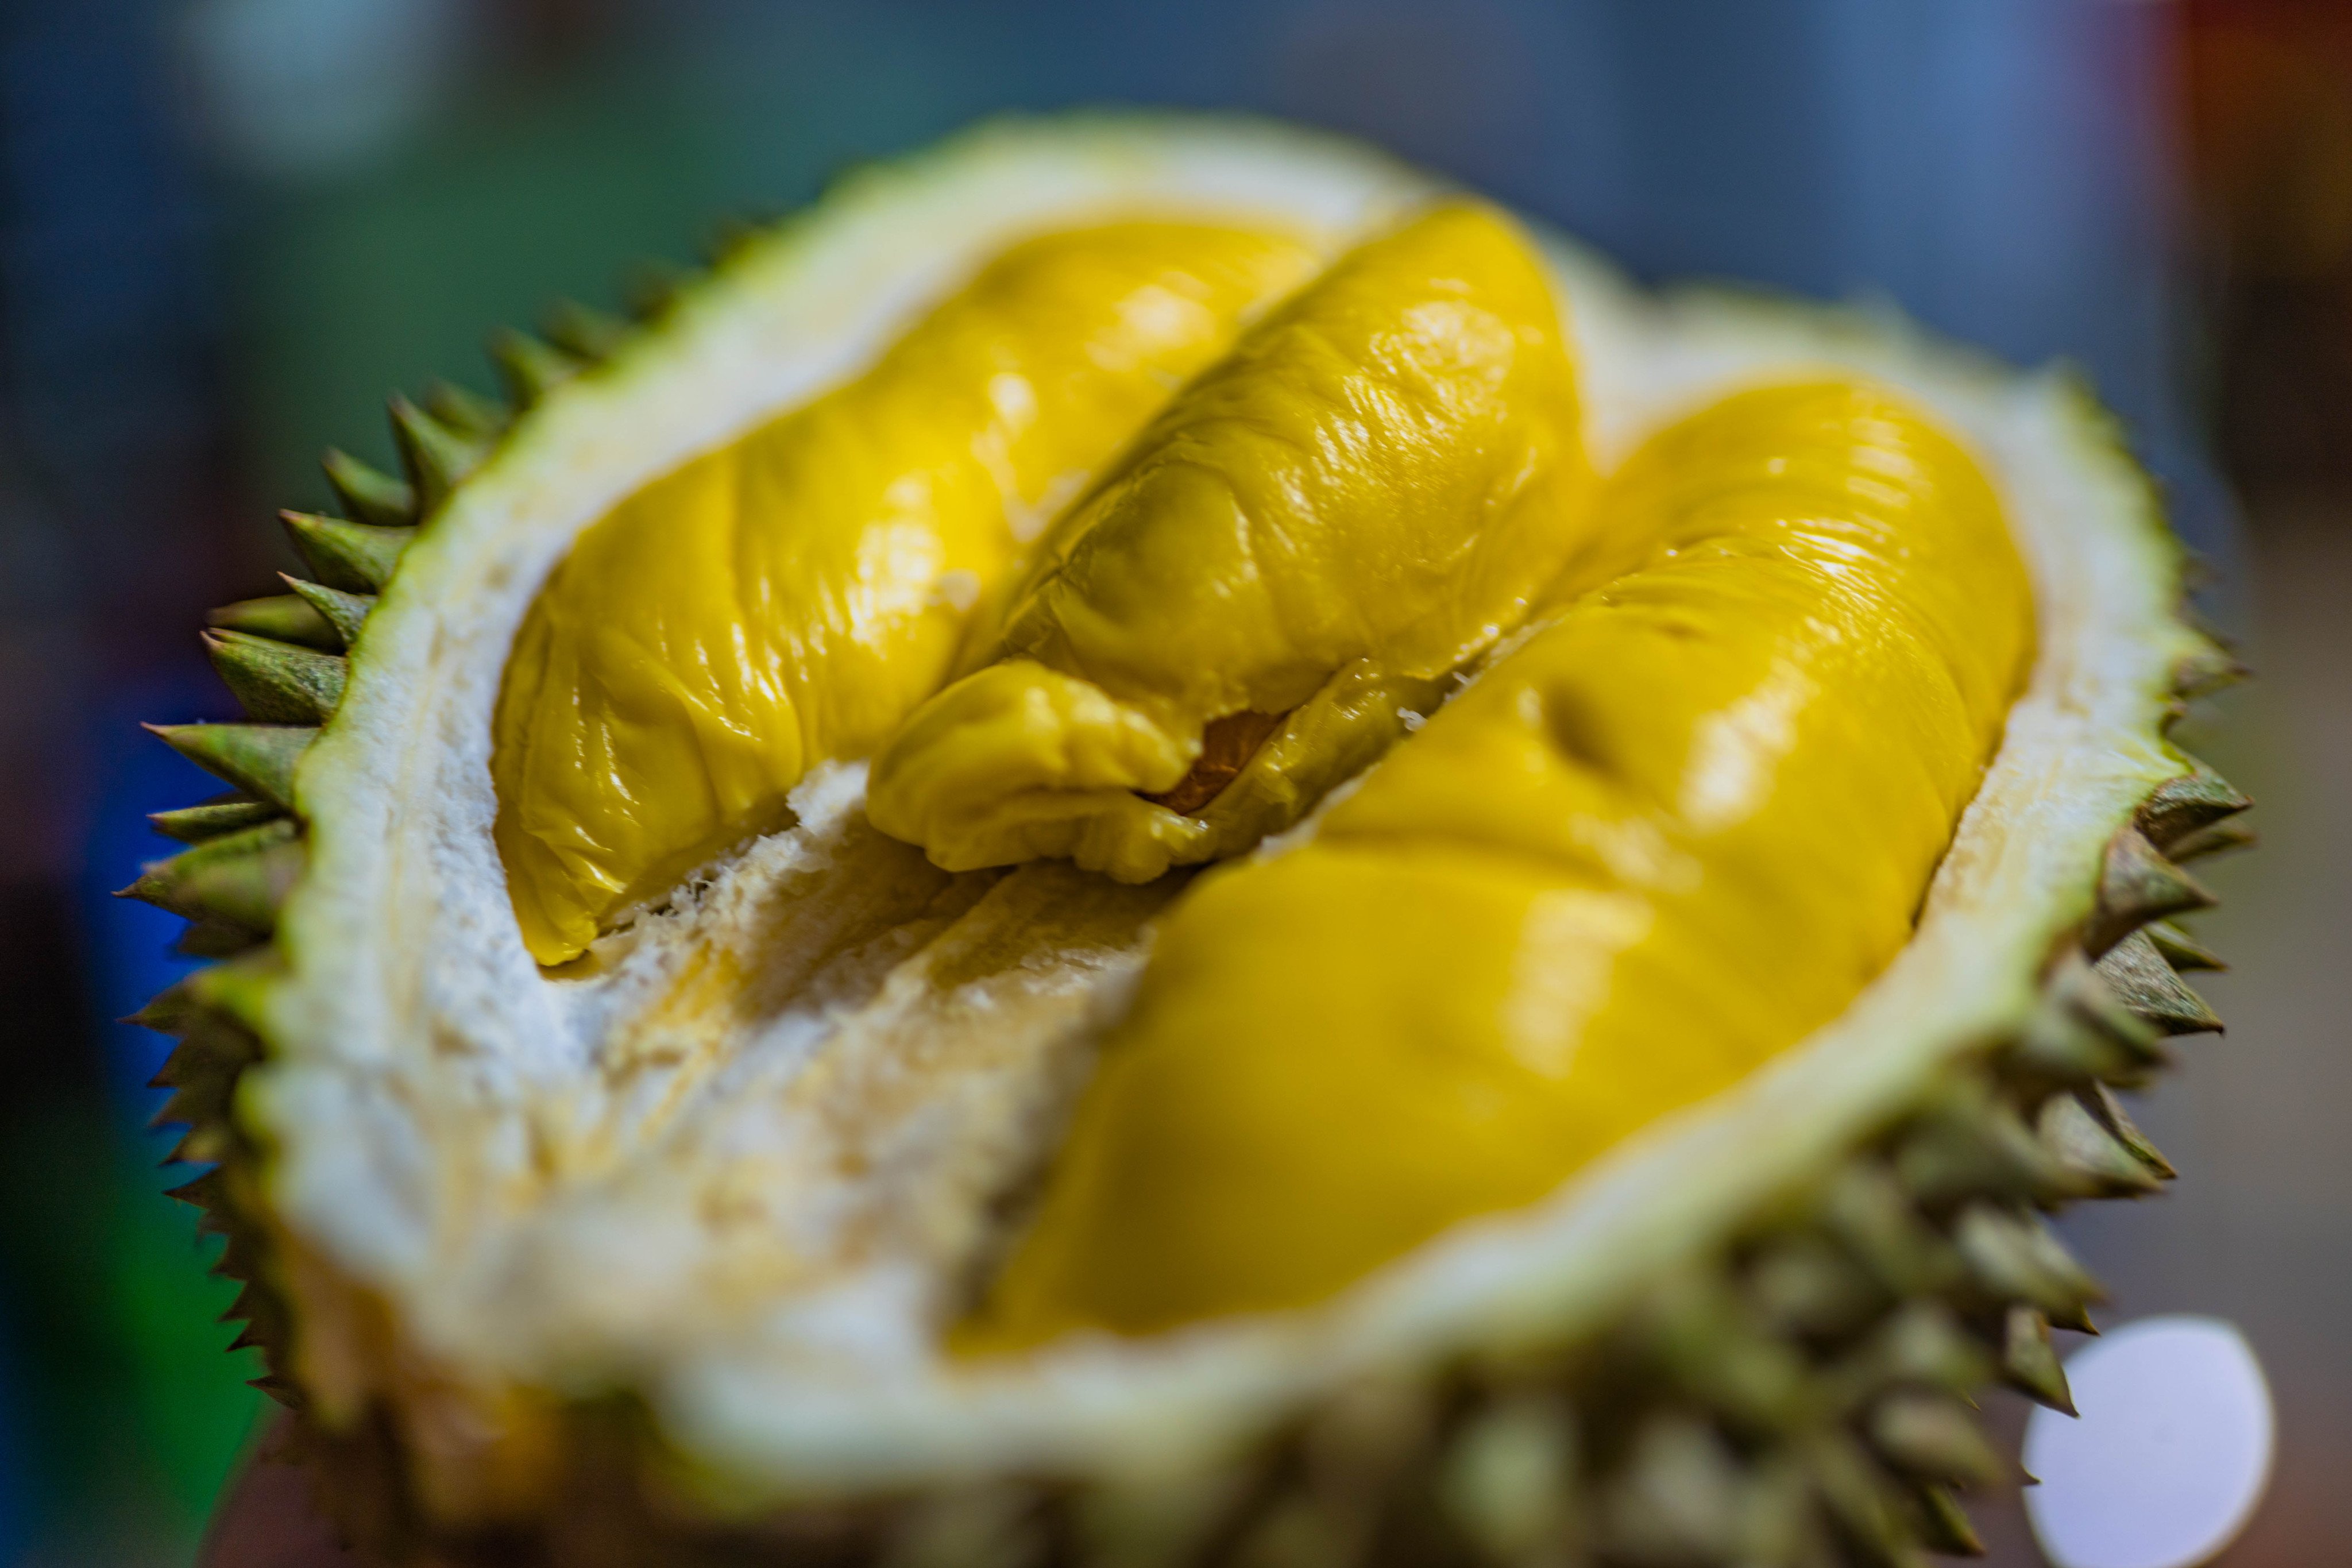 A Musang King durian from Malaysia. The country, among others, is monitoring China’s progress in producing the fruit in case it becomes a major rival. Photo: Shutterstock